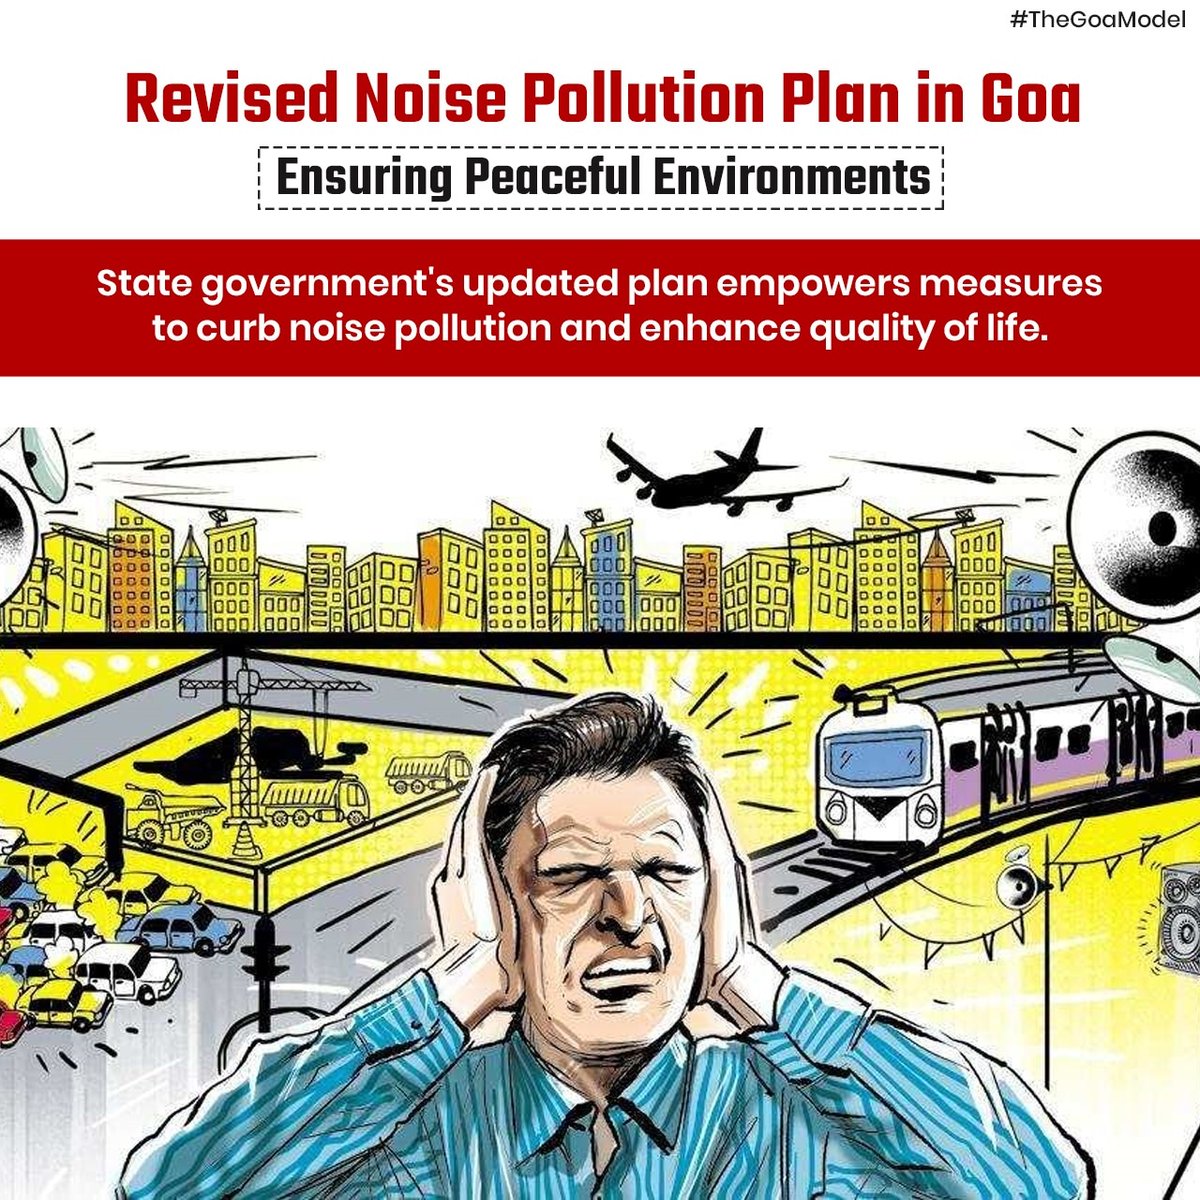 Goa unveils a revised plan to combat noise pollution, ensuring peaceful environments and better living conditions. Empowering authorities and introducing clear guidelines, this initiative aims for a quieter and more harmonious atmosphere. #NoisePollution #GoaPeace #TheGoaModel